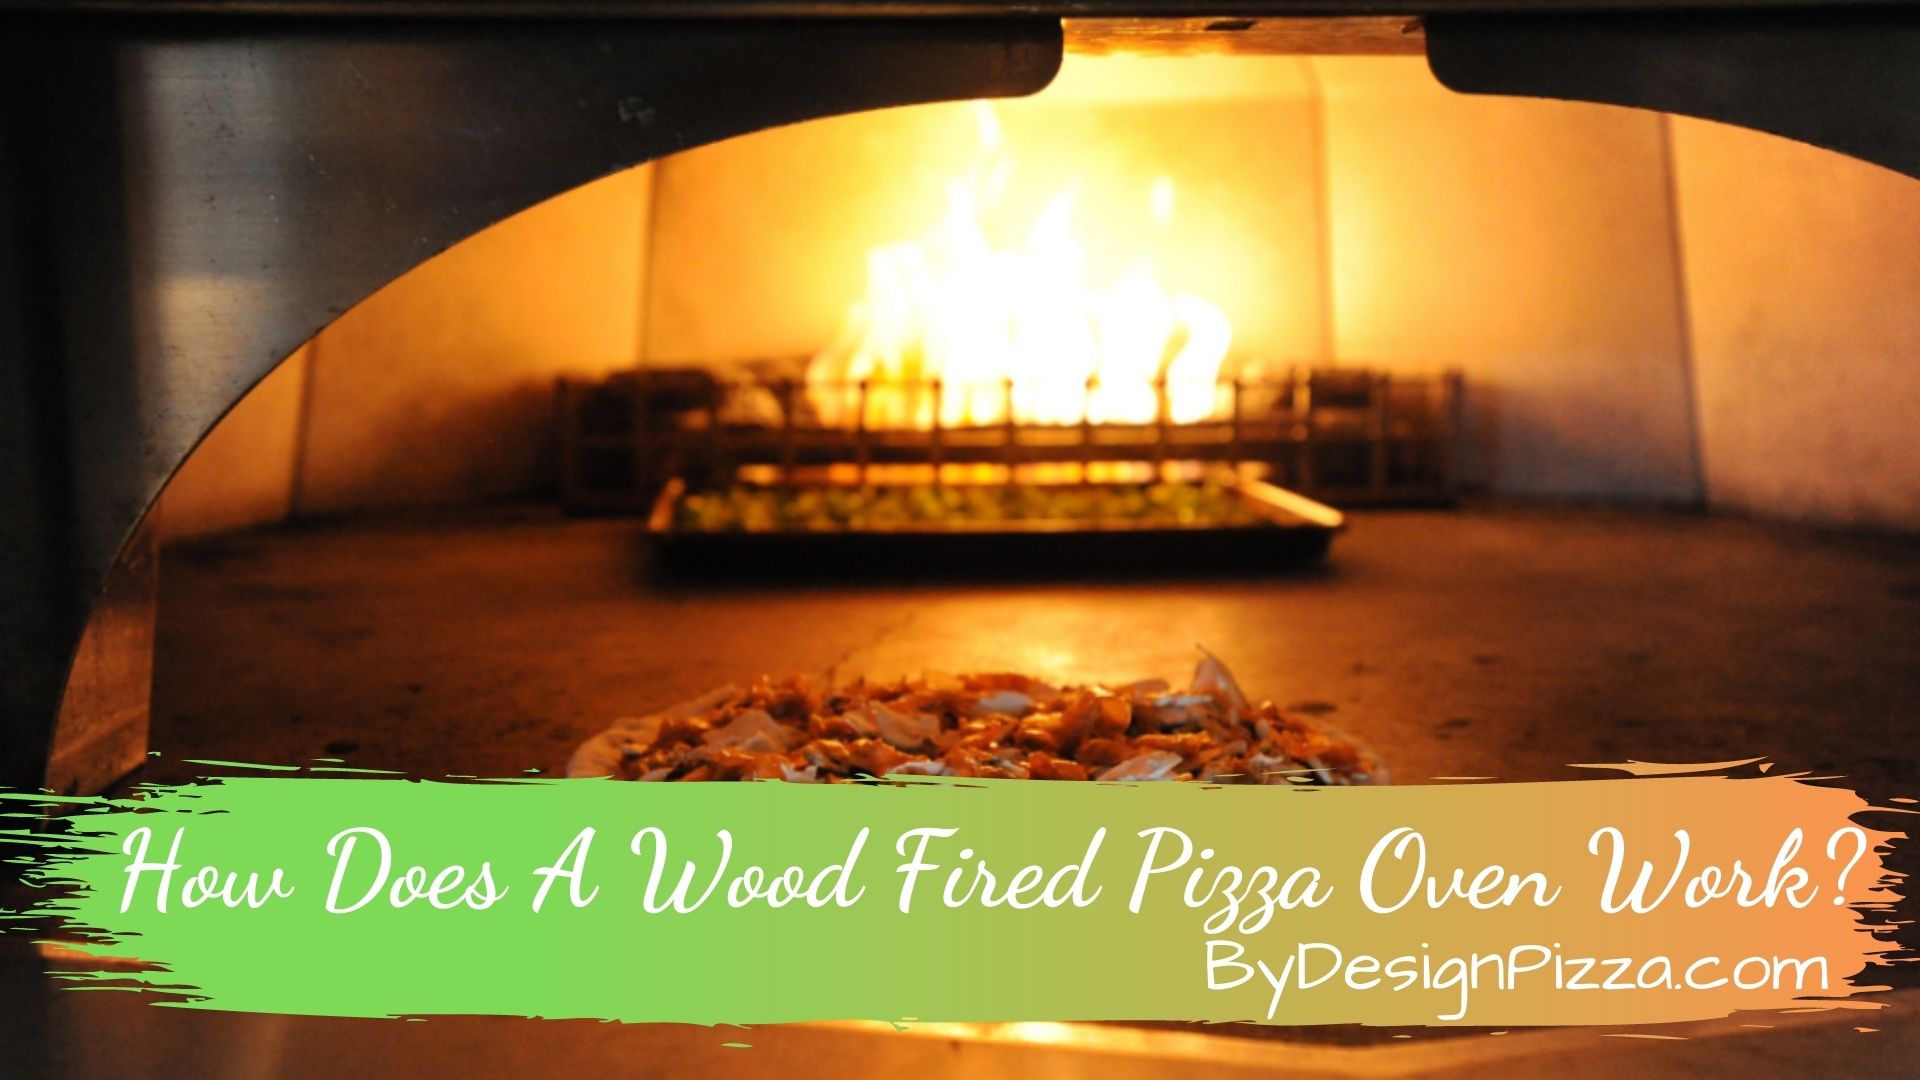 Health Benefits Of Wood Fired Pizza